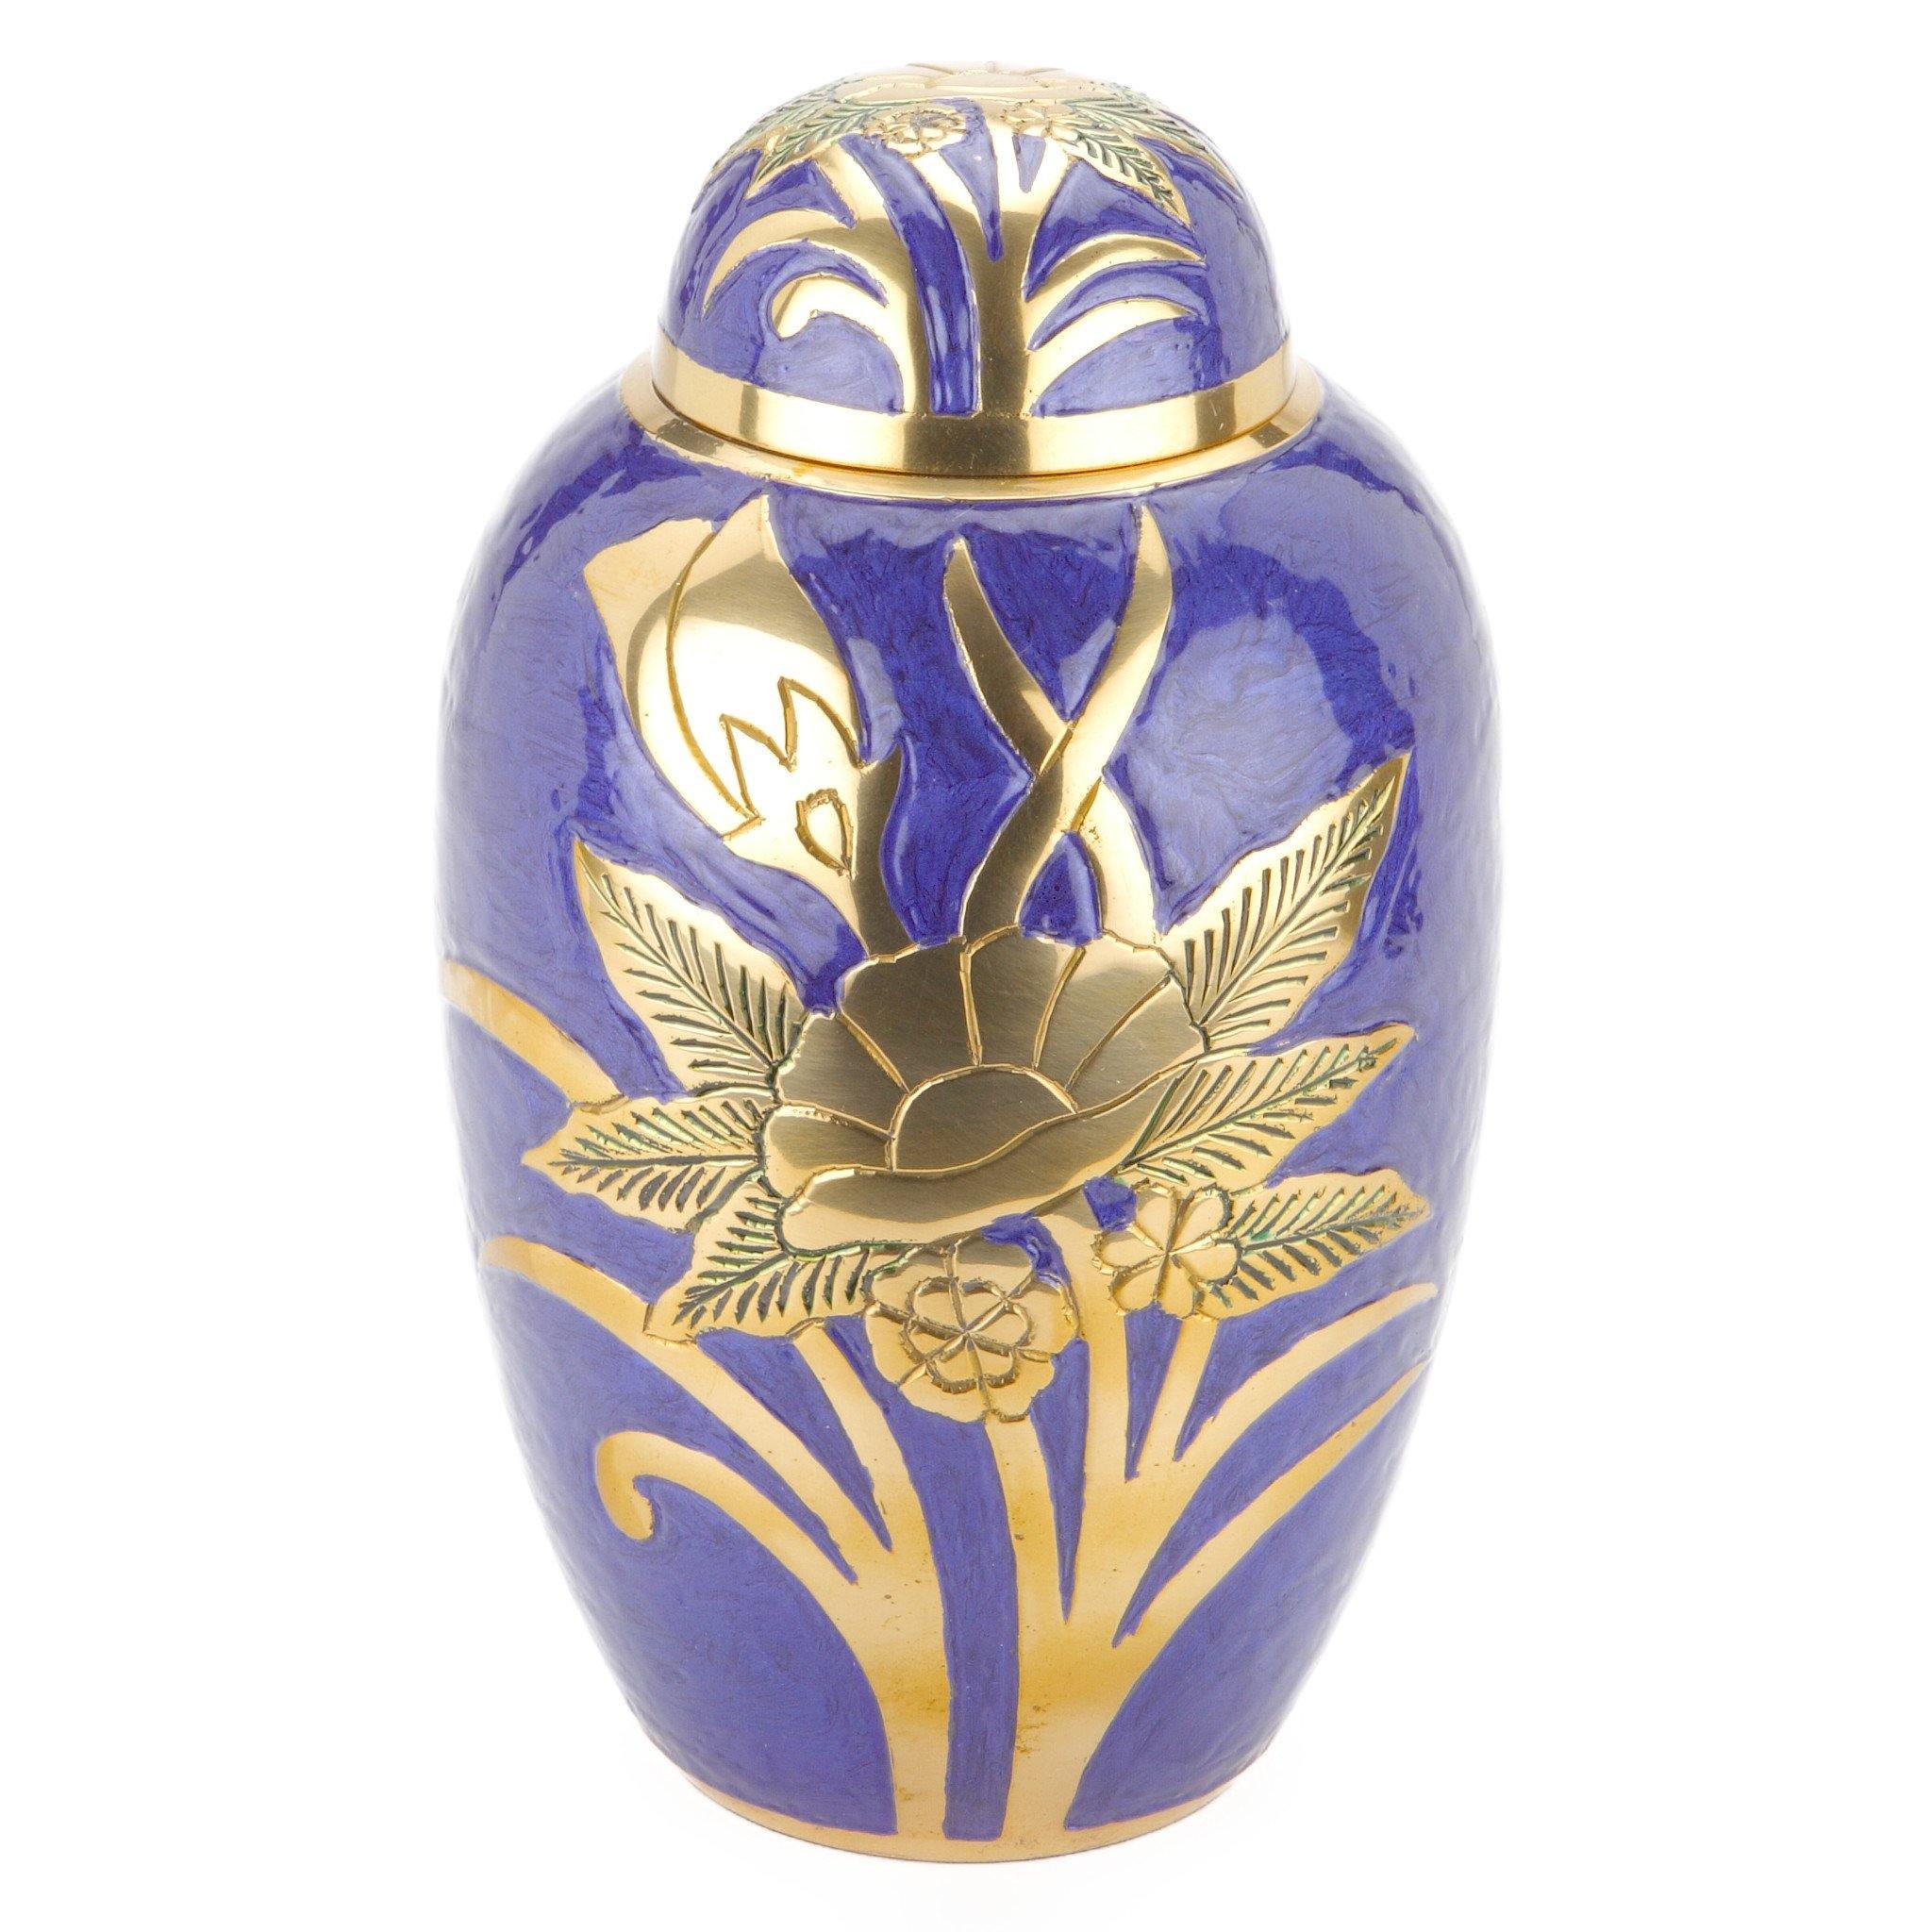 Aylesbury Cremation Ashes Urn Adult RC